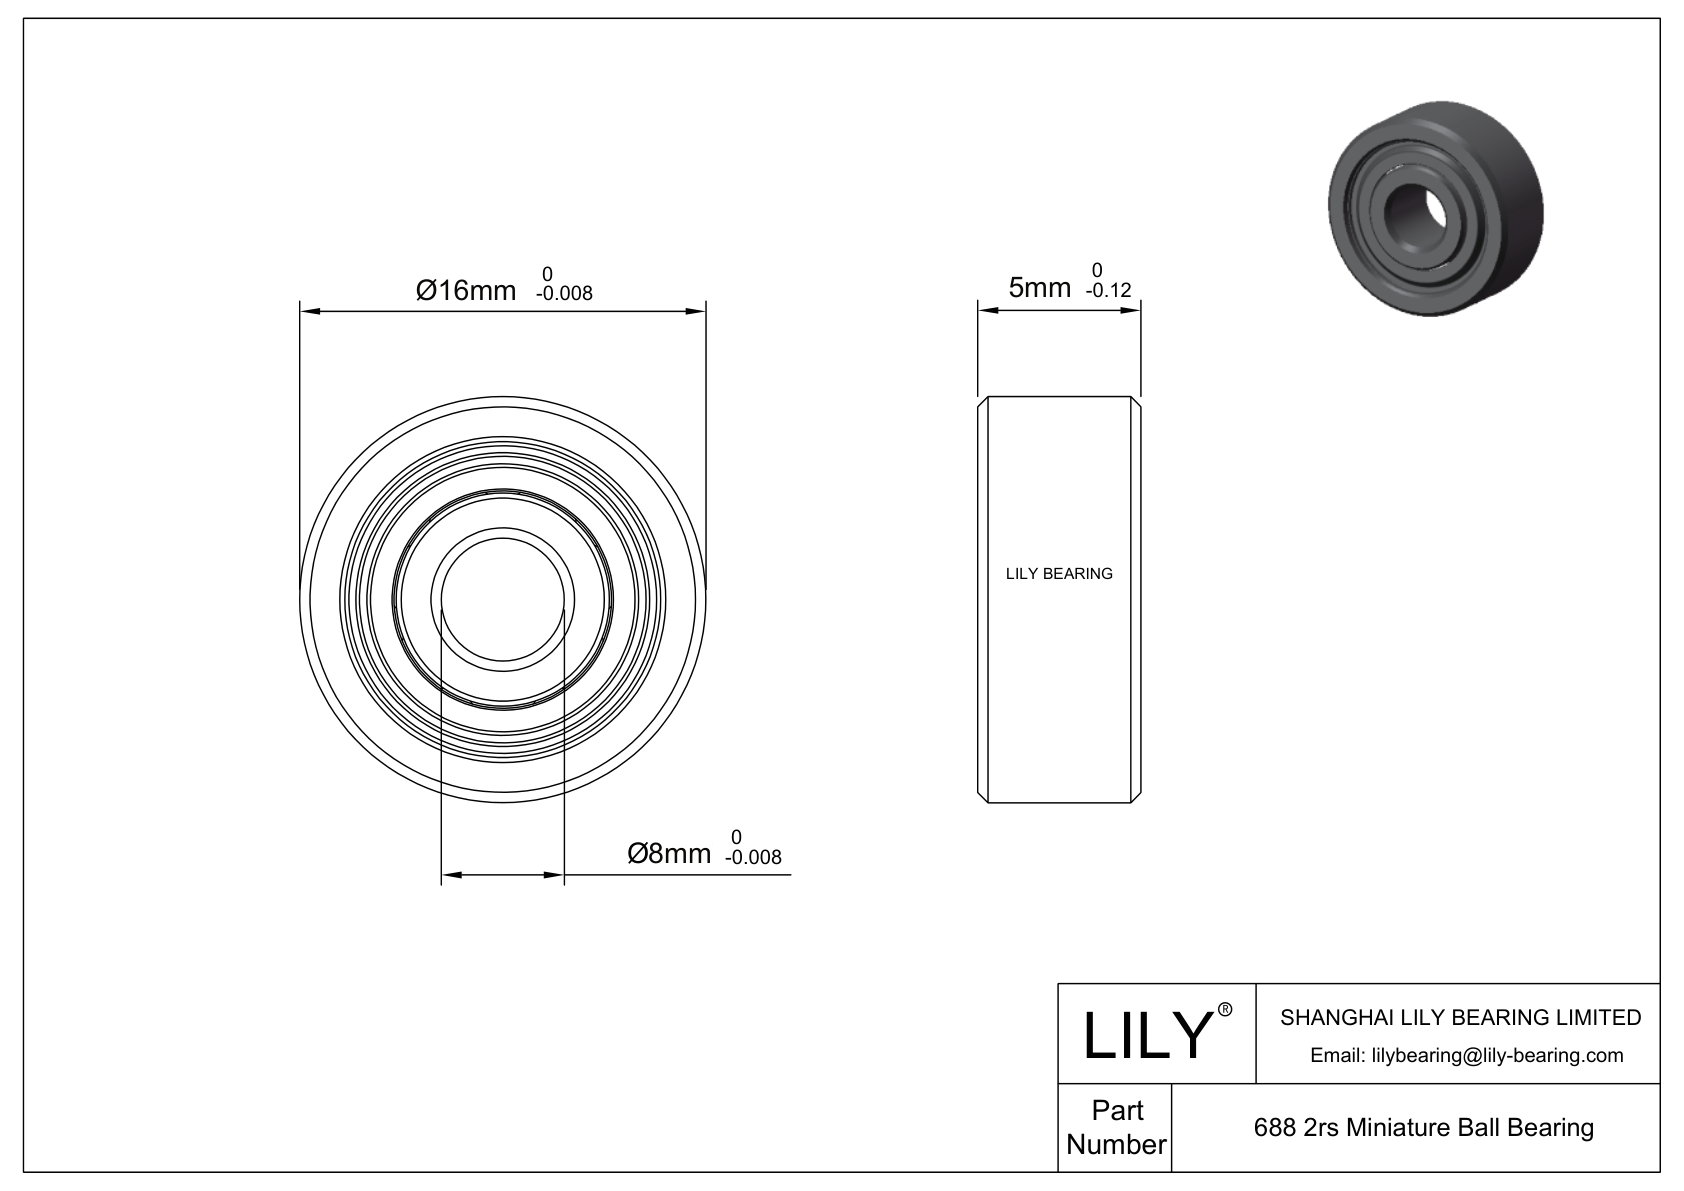 LILY-BS68822-7 POM Coated Bearing cad drawing